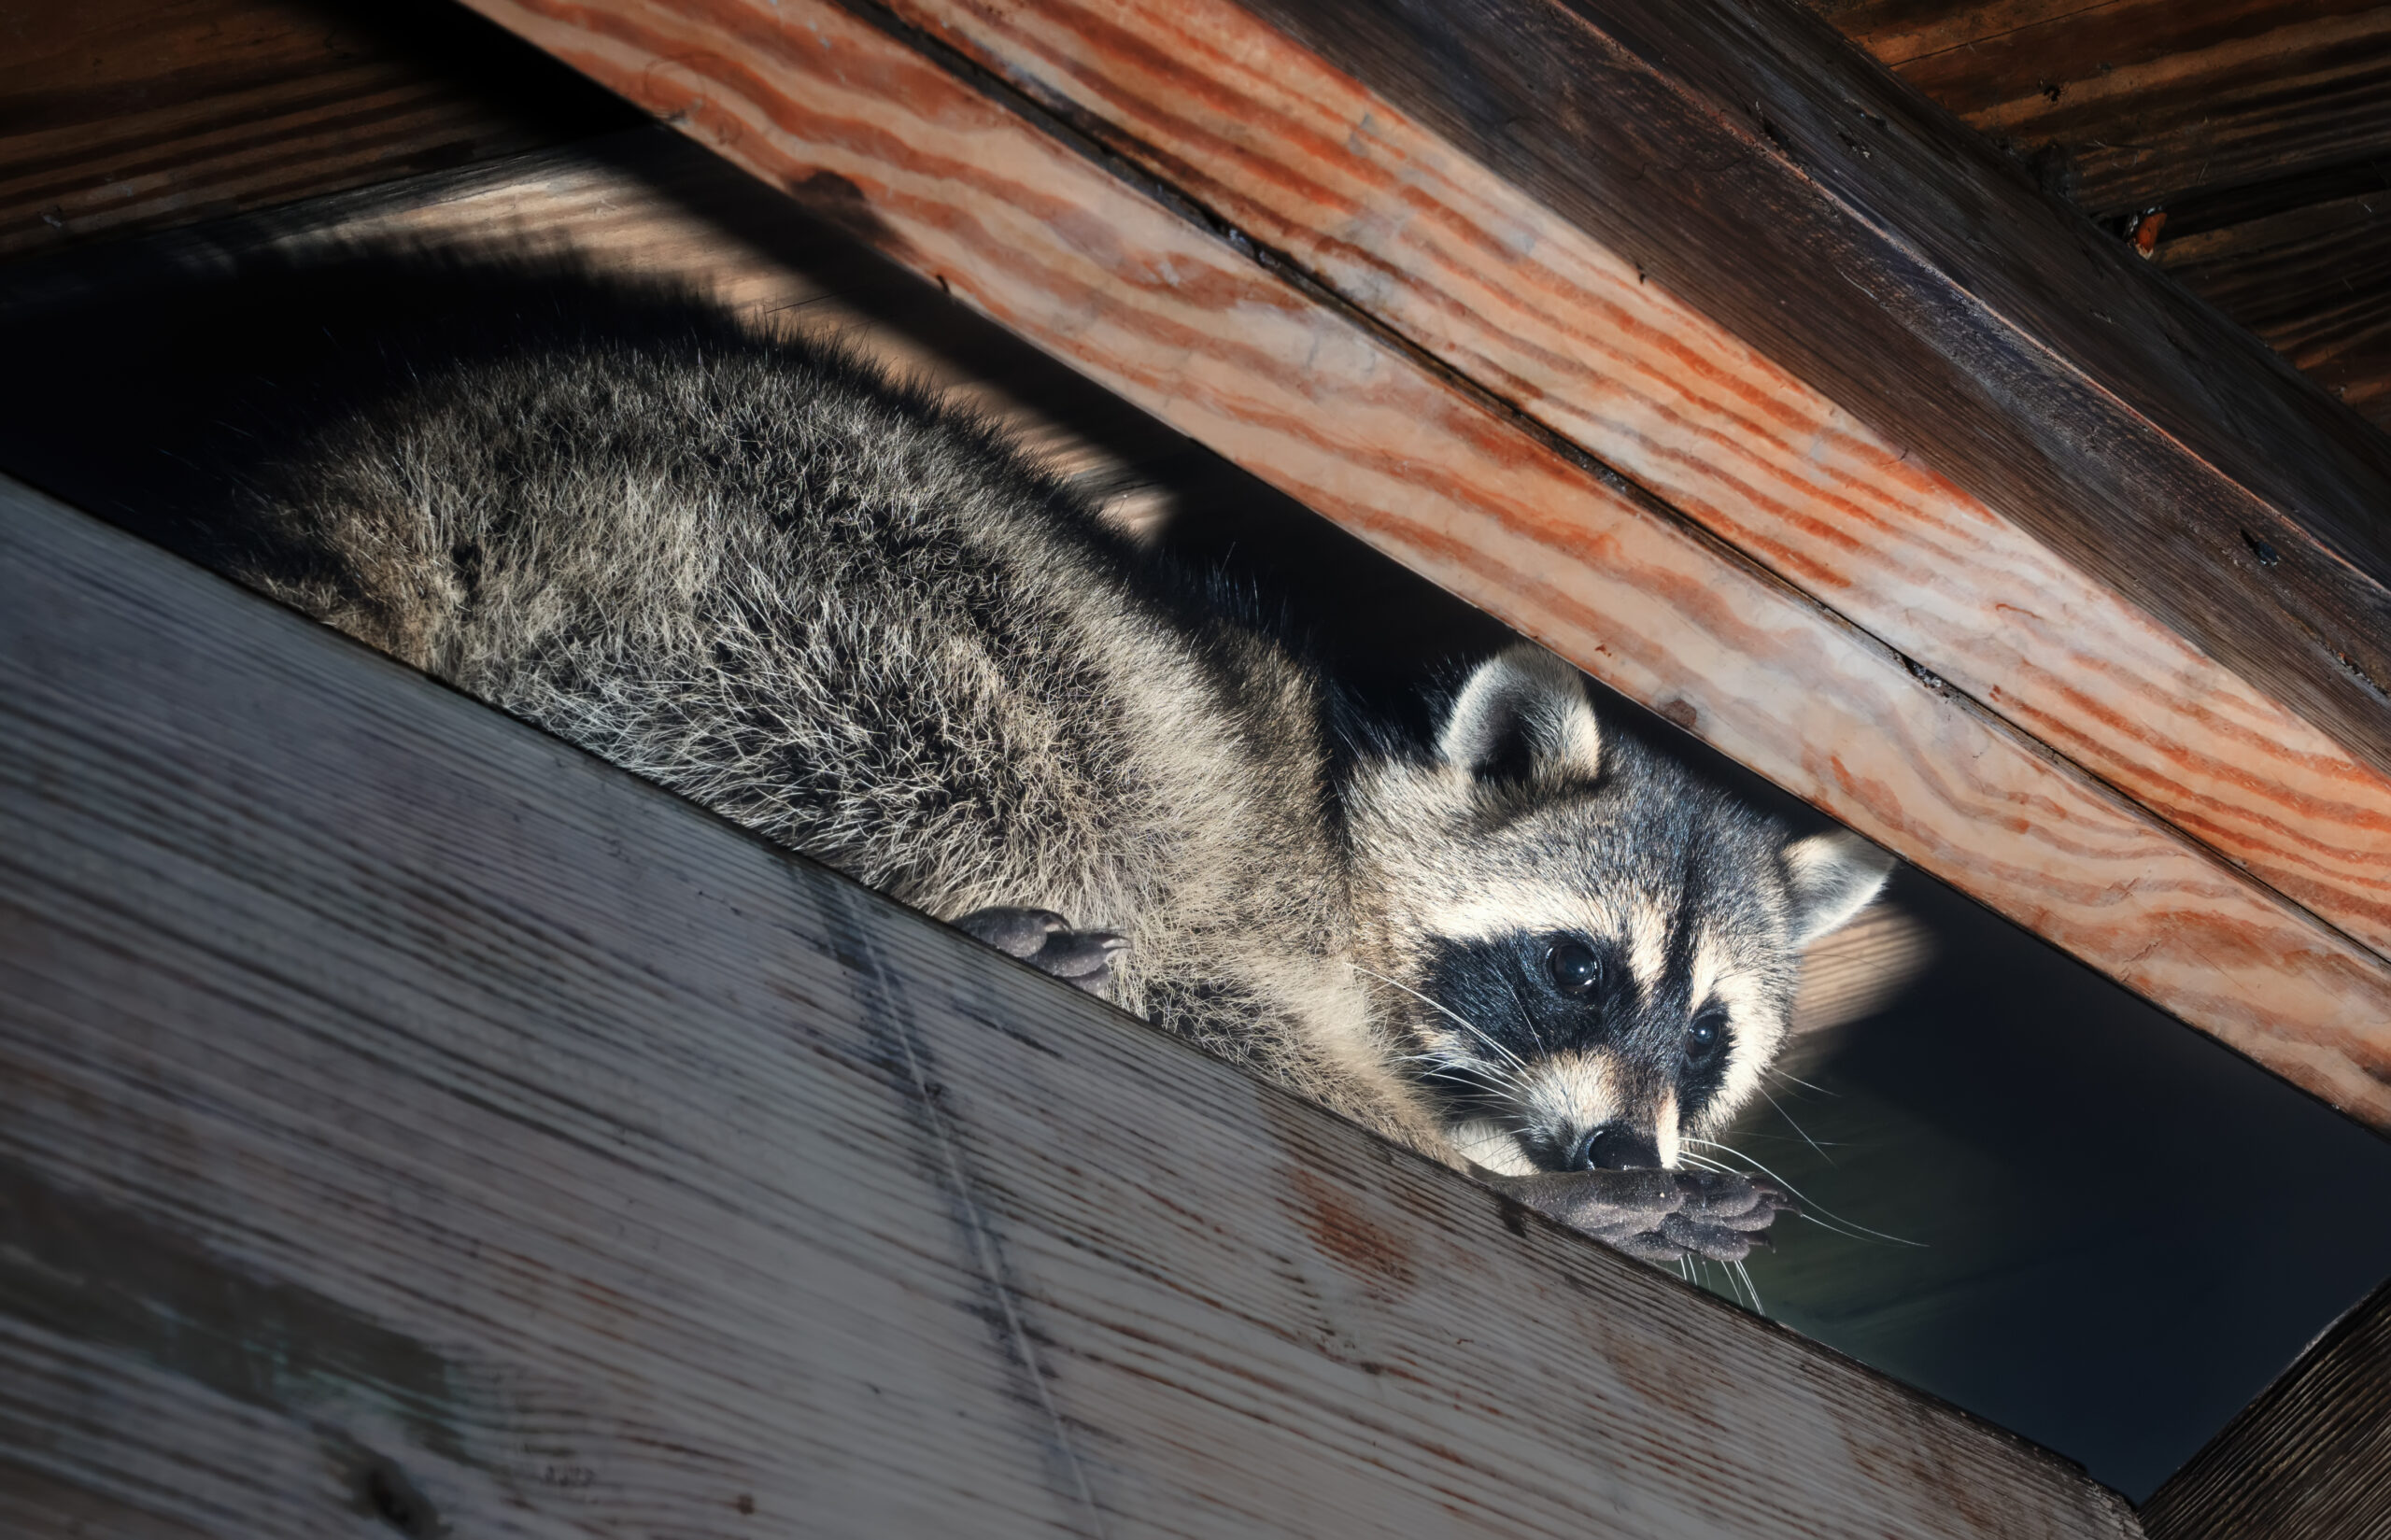 American,Raccoon,Climbed,Into,The,Attic,Of,A,House